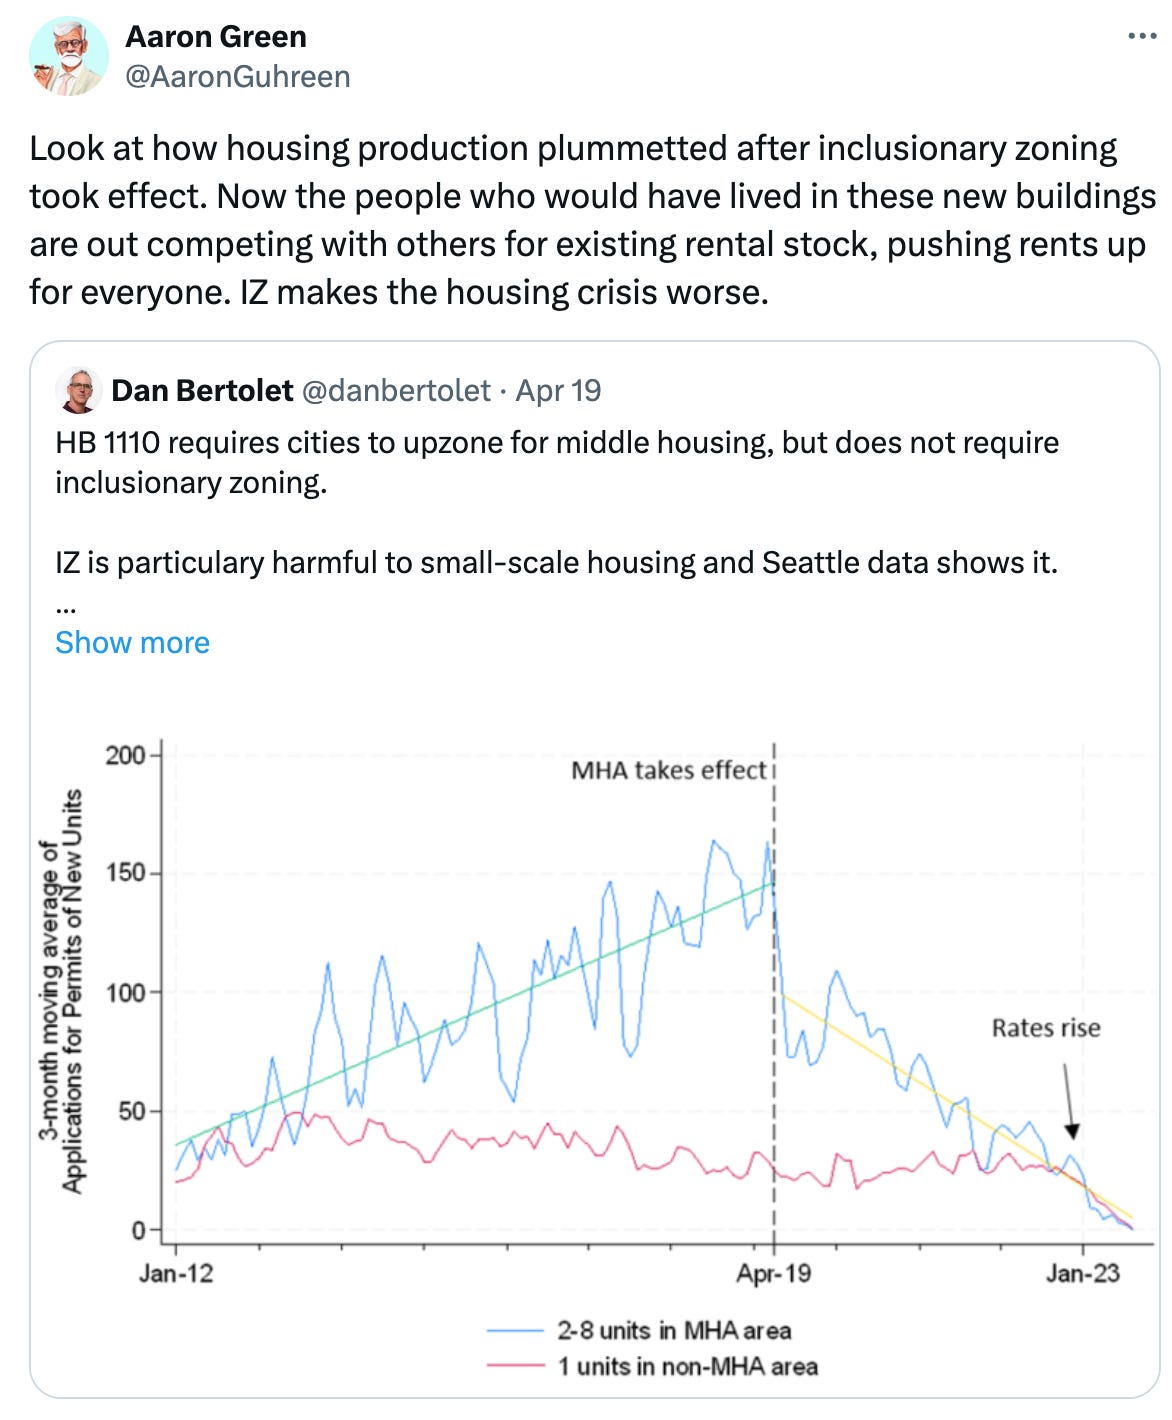 Post See new posts Conversation Aaron Green @AaronGuhreen Look at how housing production plummetted after inclusionary zoning took effect. Now the people who would have lived in these new buildings are out competing with others for existing rental stock, pushing rents up for everyone. IZ makes the housing crisis worse. Quote Dan Bertolet @danbertolet · Apr 19 HB 1110 requires cities to upzone for middle housing, but does not require inclusionary zoning.  IZ is particulary harmful to small-scale housing and Seattle data shows it.   To avoid undermining HB 1110, Seattle must not impose IZ on middle housing.  https://sightline.org/2024/04/18/seattle-deserves-a-better-comp-plan/ Show more